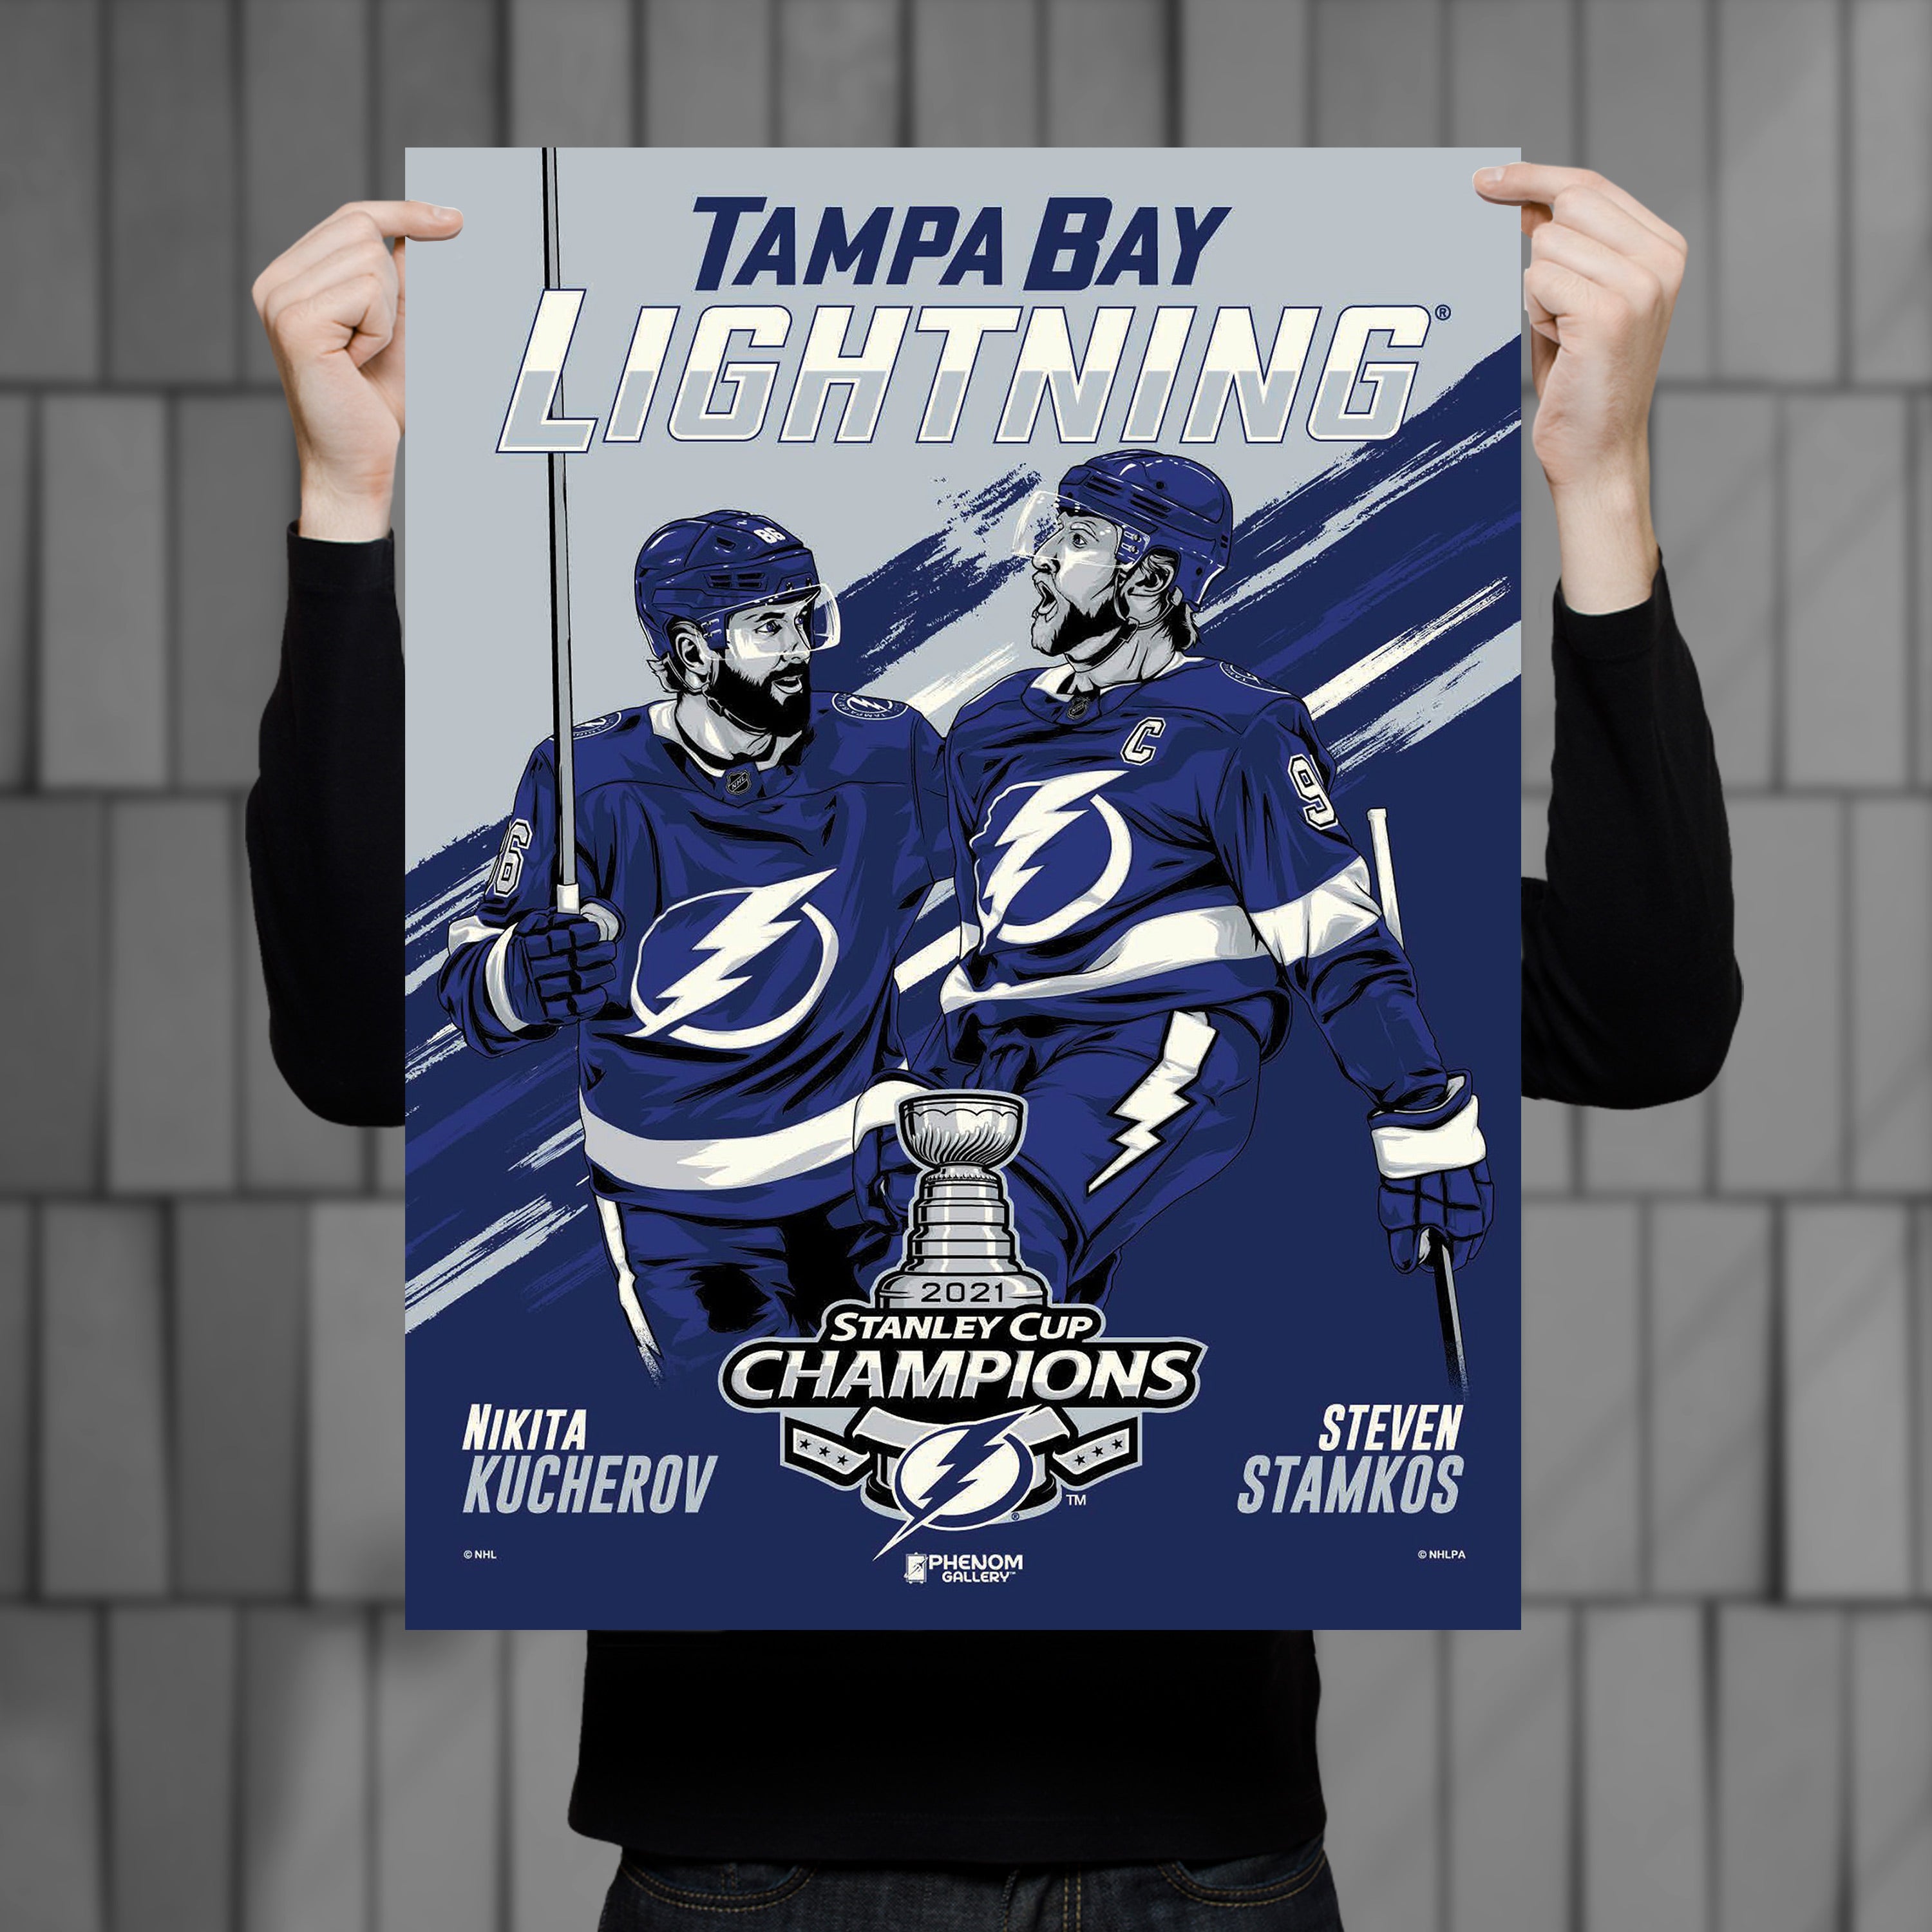 Tampa Bay Lightning Fanatics Authentic 2021 Stanley Cup Champions Framed 5  x 7 Collage with 2021 Stanley Cup Champions Jersey Patch